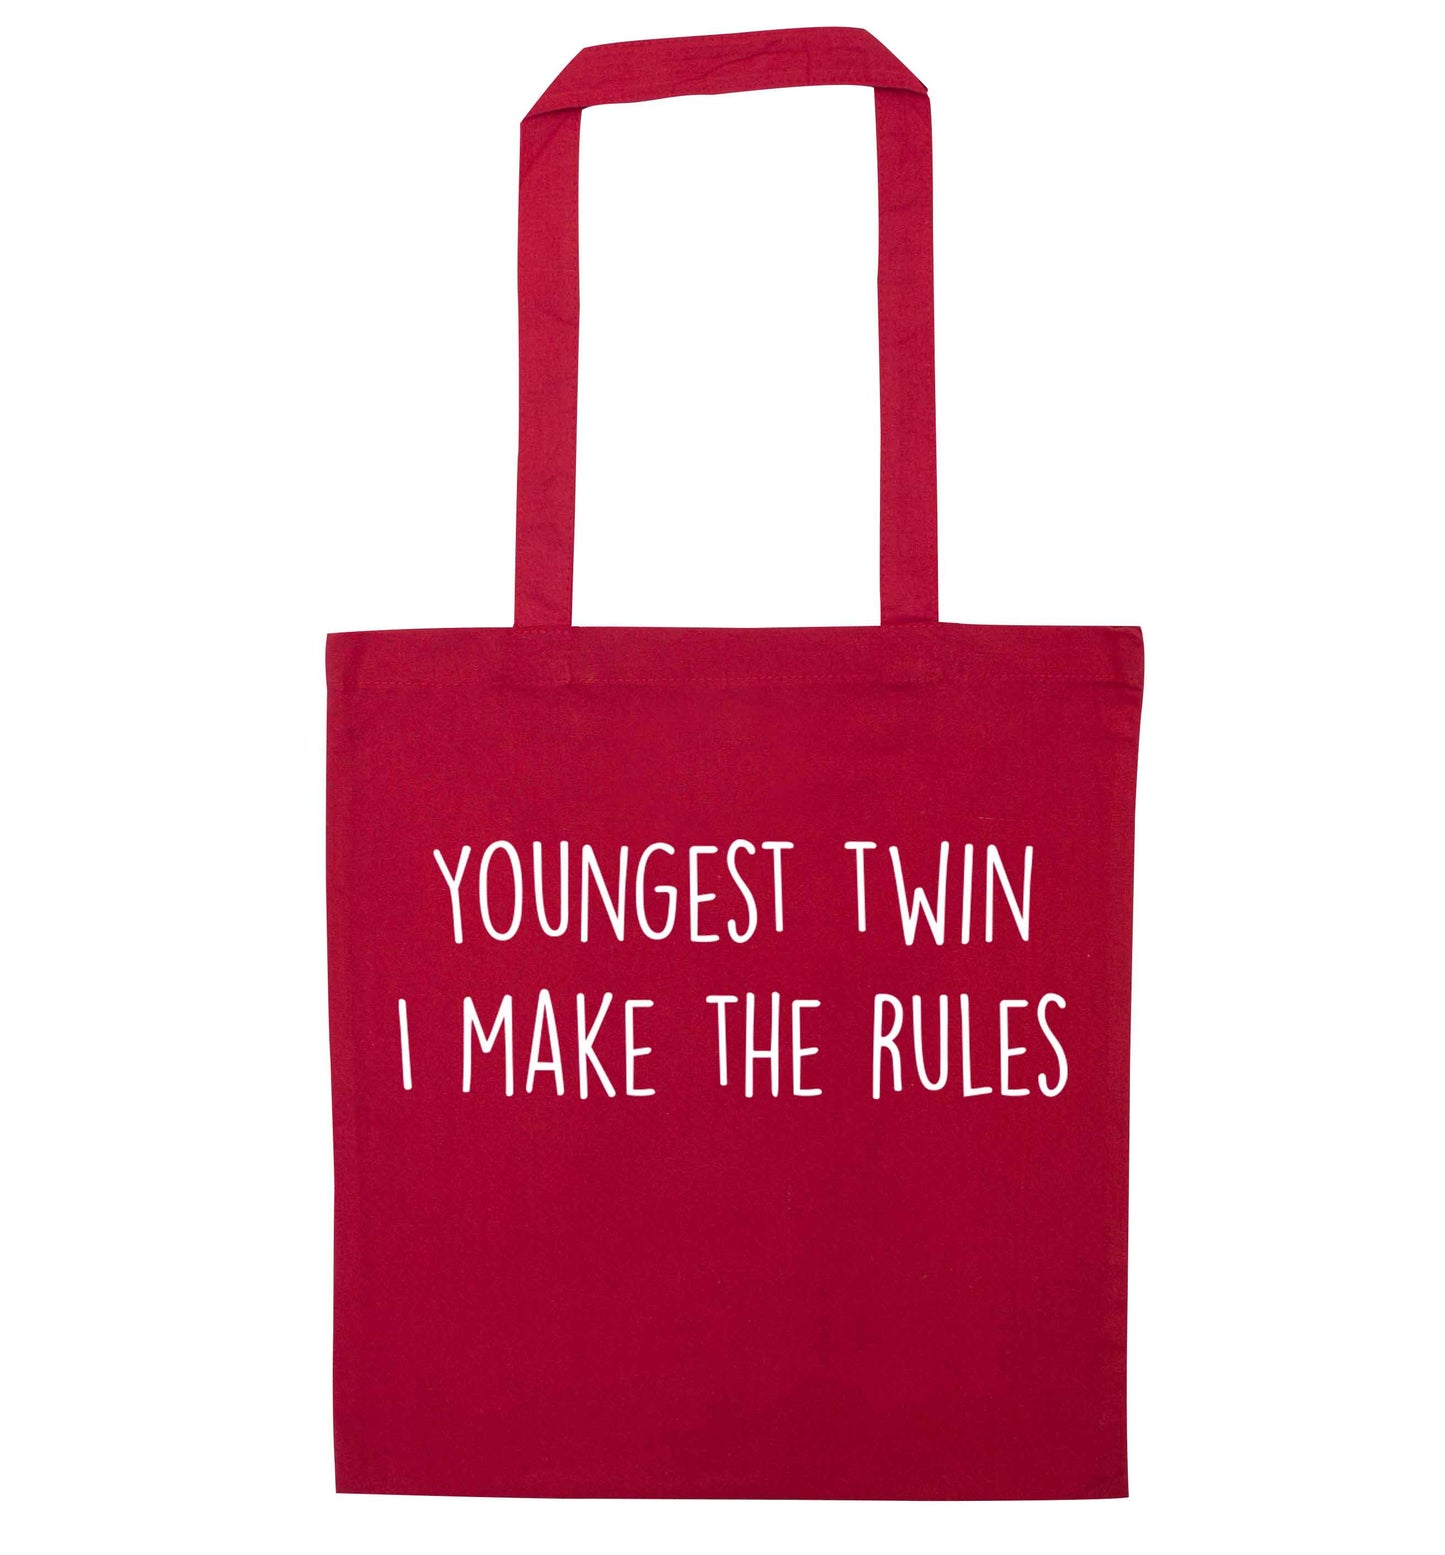 Youngest twin I make the rules red tote bag